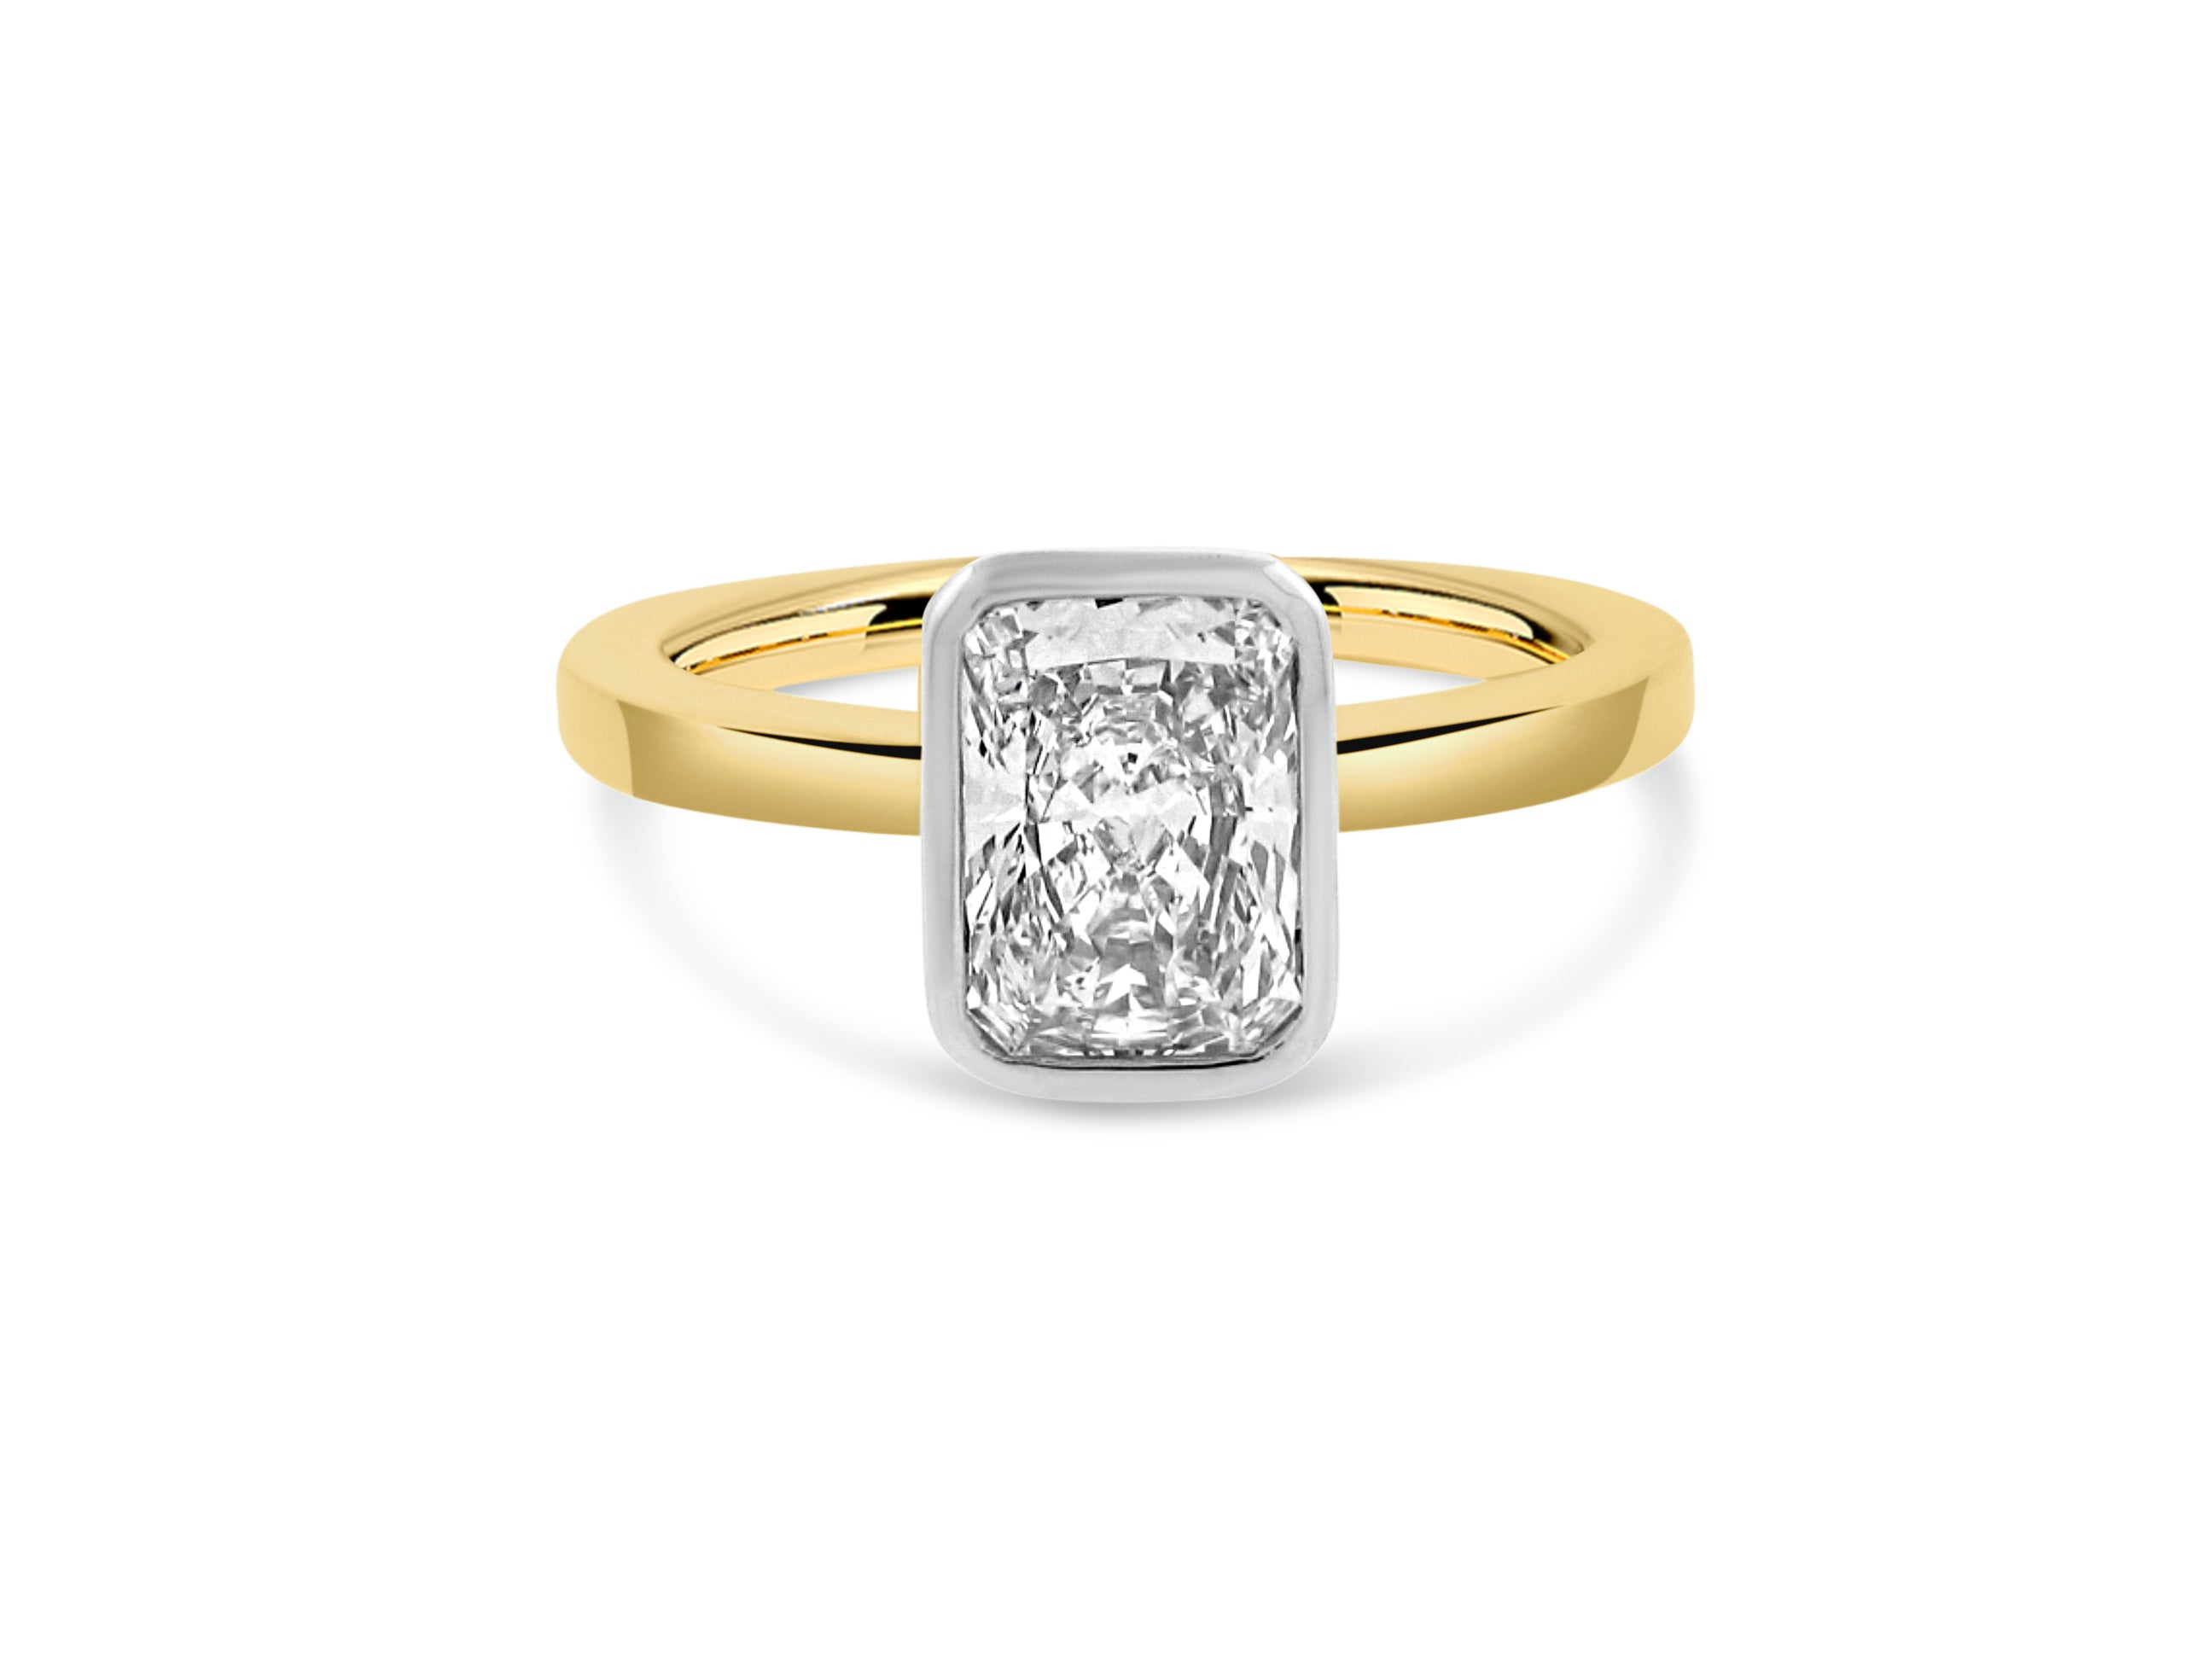 PRIVE' 18K YELLOW AND WHITE GOLD 1.54CT SWAROVSKI  LAB GROWN RADIANT CUT DIAMOND RING WITH .10CTSI/G ACCENTS.